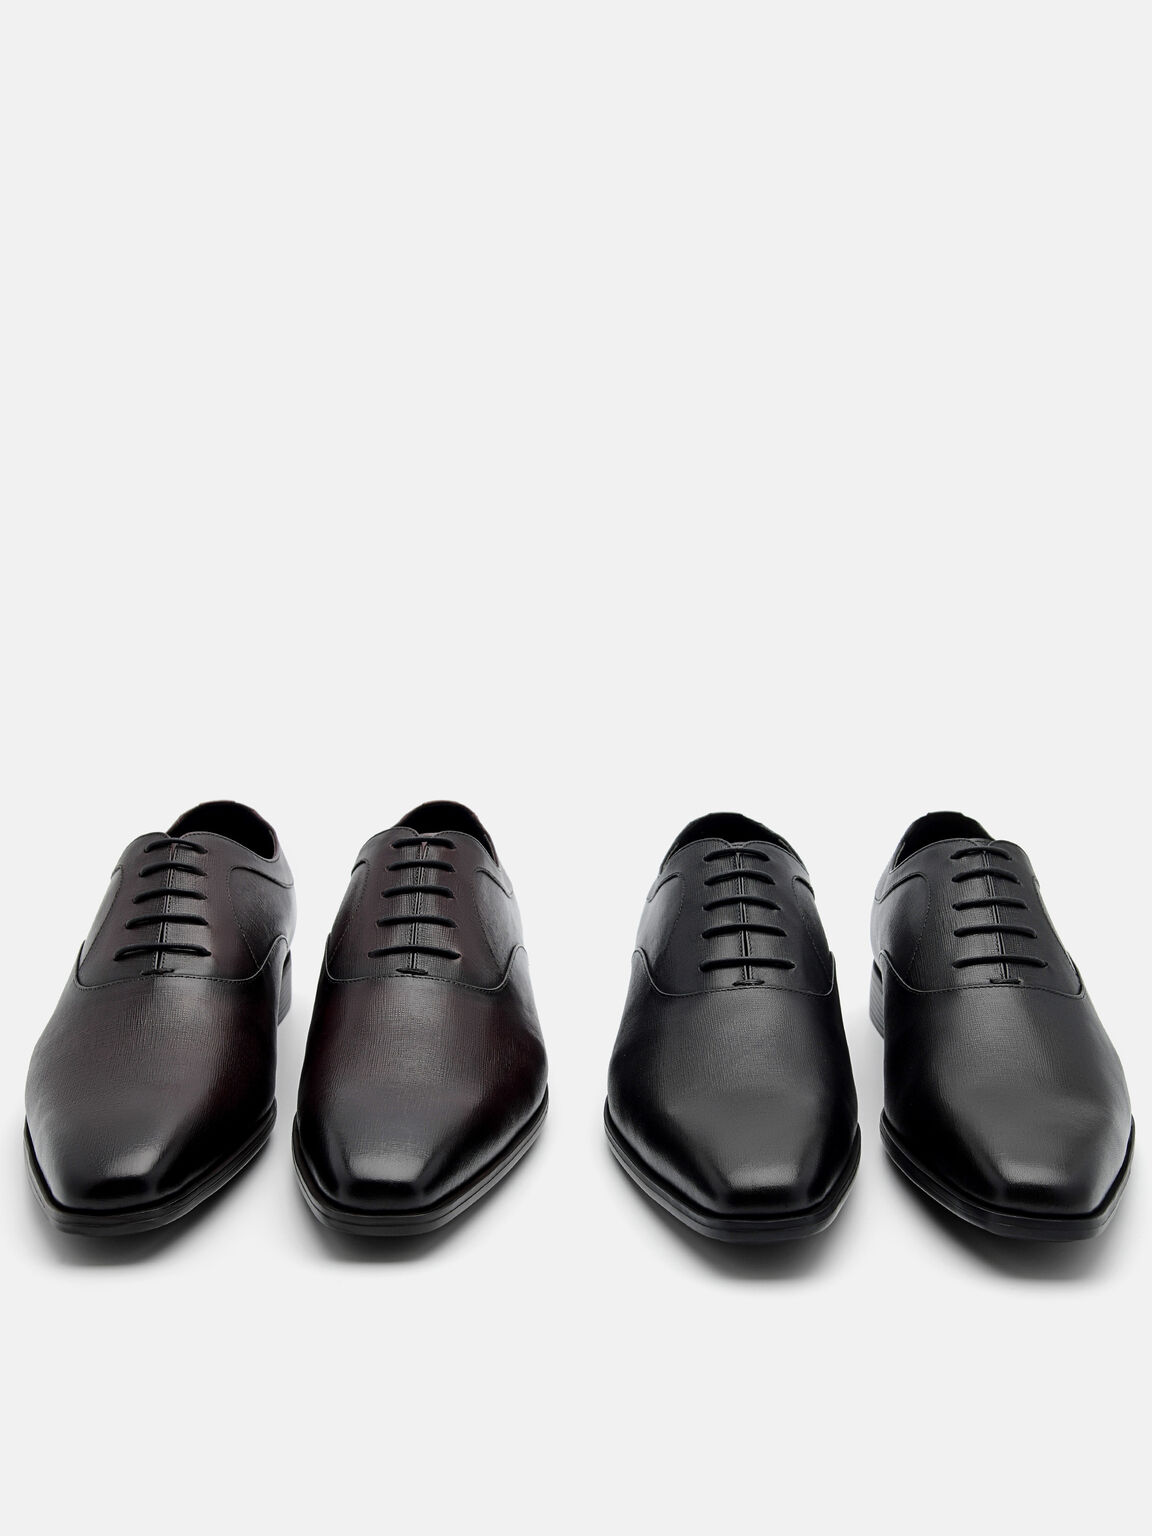 Altitude Lightweight Leather Oxford Shoes, Black